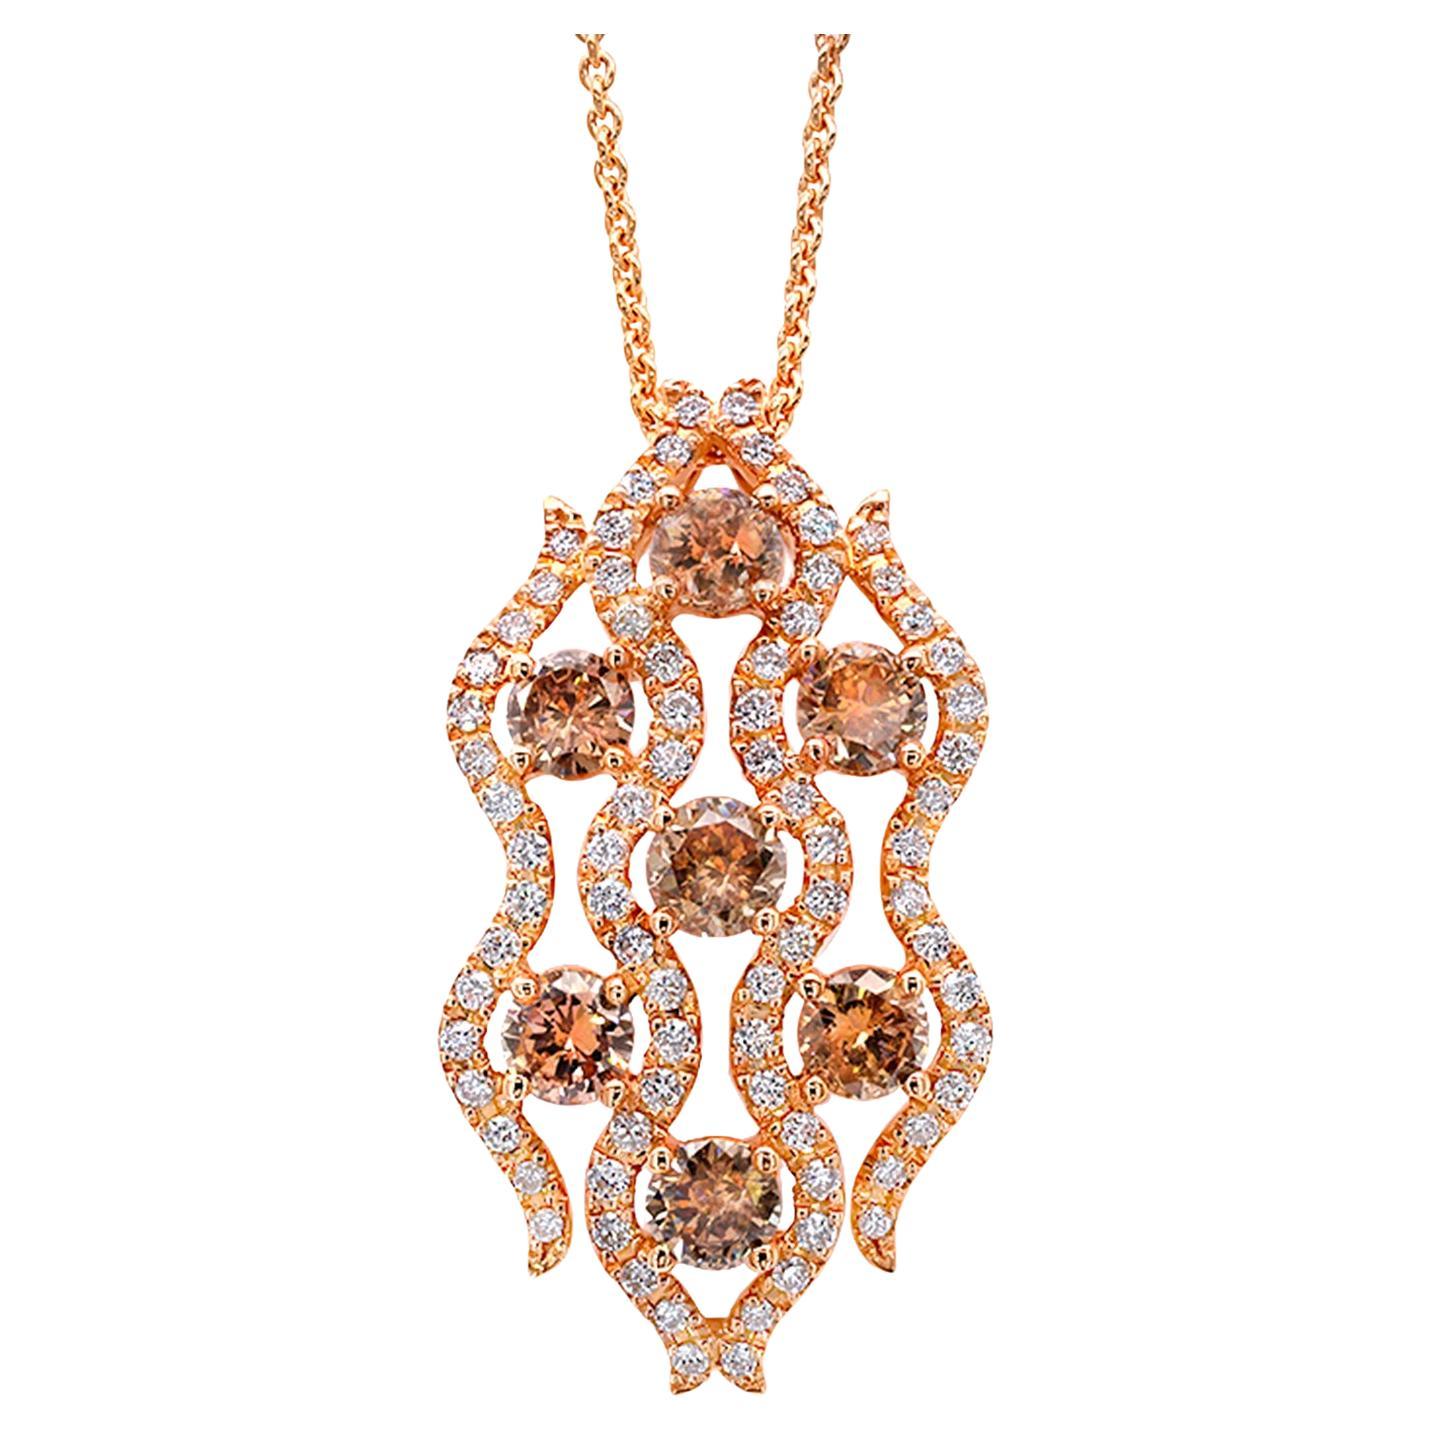 Collier pendentif champagne diamants blancs 1,47 carats or rose 18 carats